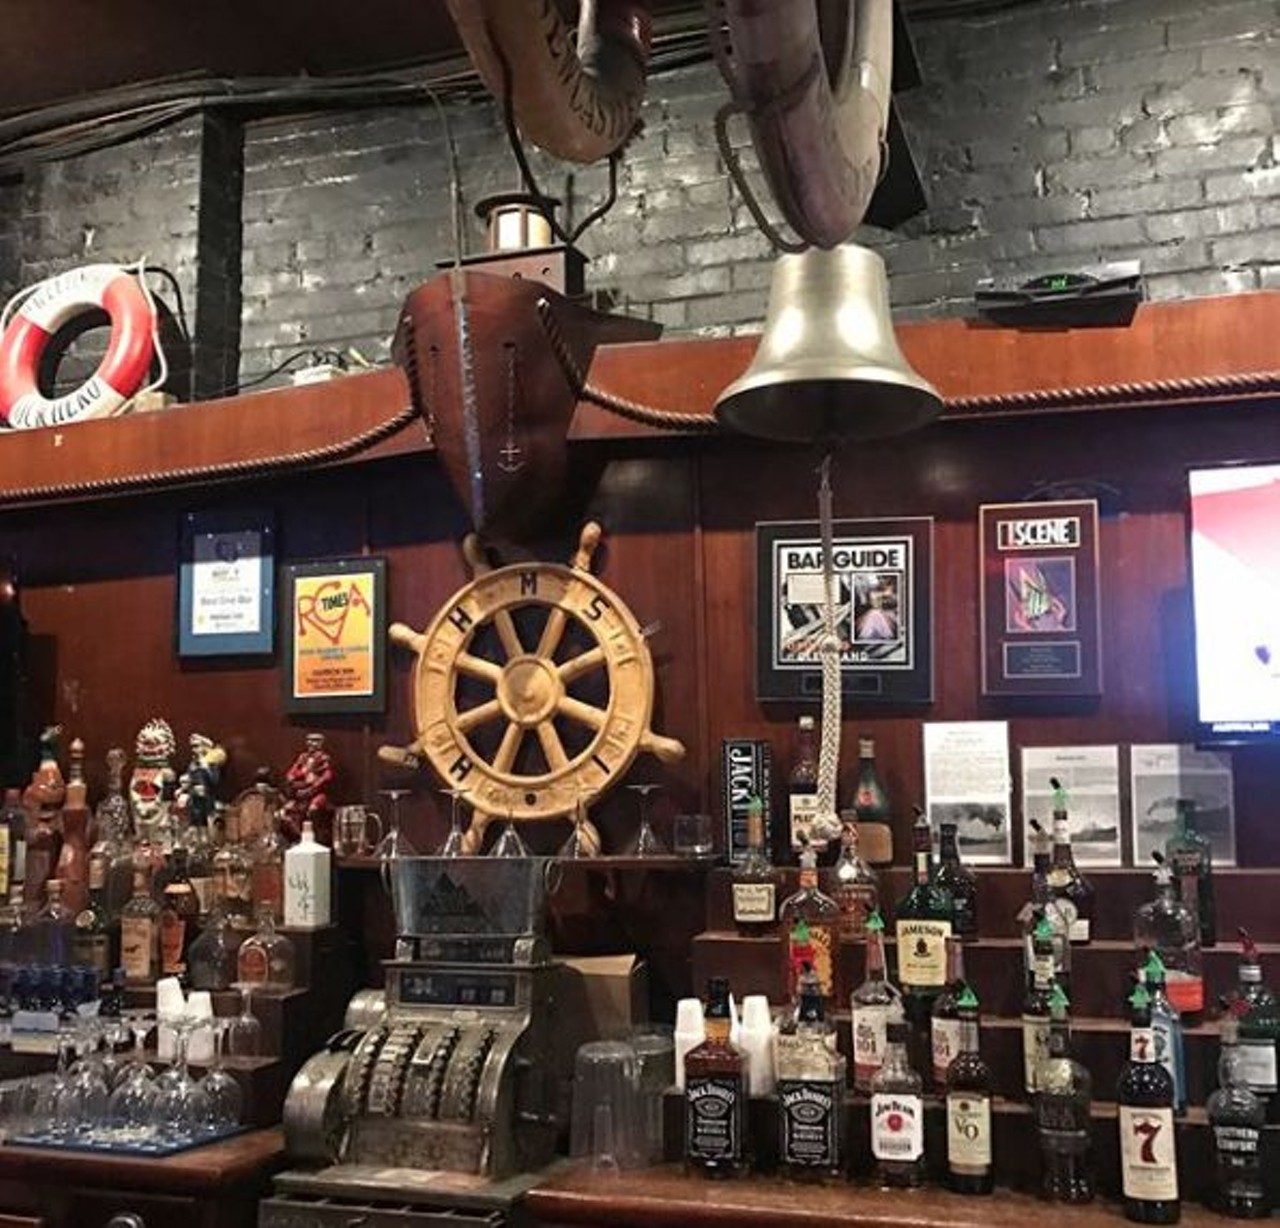  The Harbor Inn
1219 Main Ave.| (216) 241-3232
This is Cleveland&#146;s oldest, original dive bar. It dates back to the 19th century when sailors would stop in for a drink after a long day at sea. With more than 100 different beers and homemade lunches during the week, you&#146;d be crazy not to stop by.
Photo via rchillman/Instagram